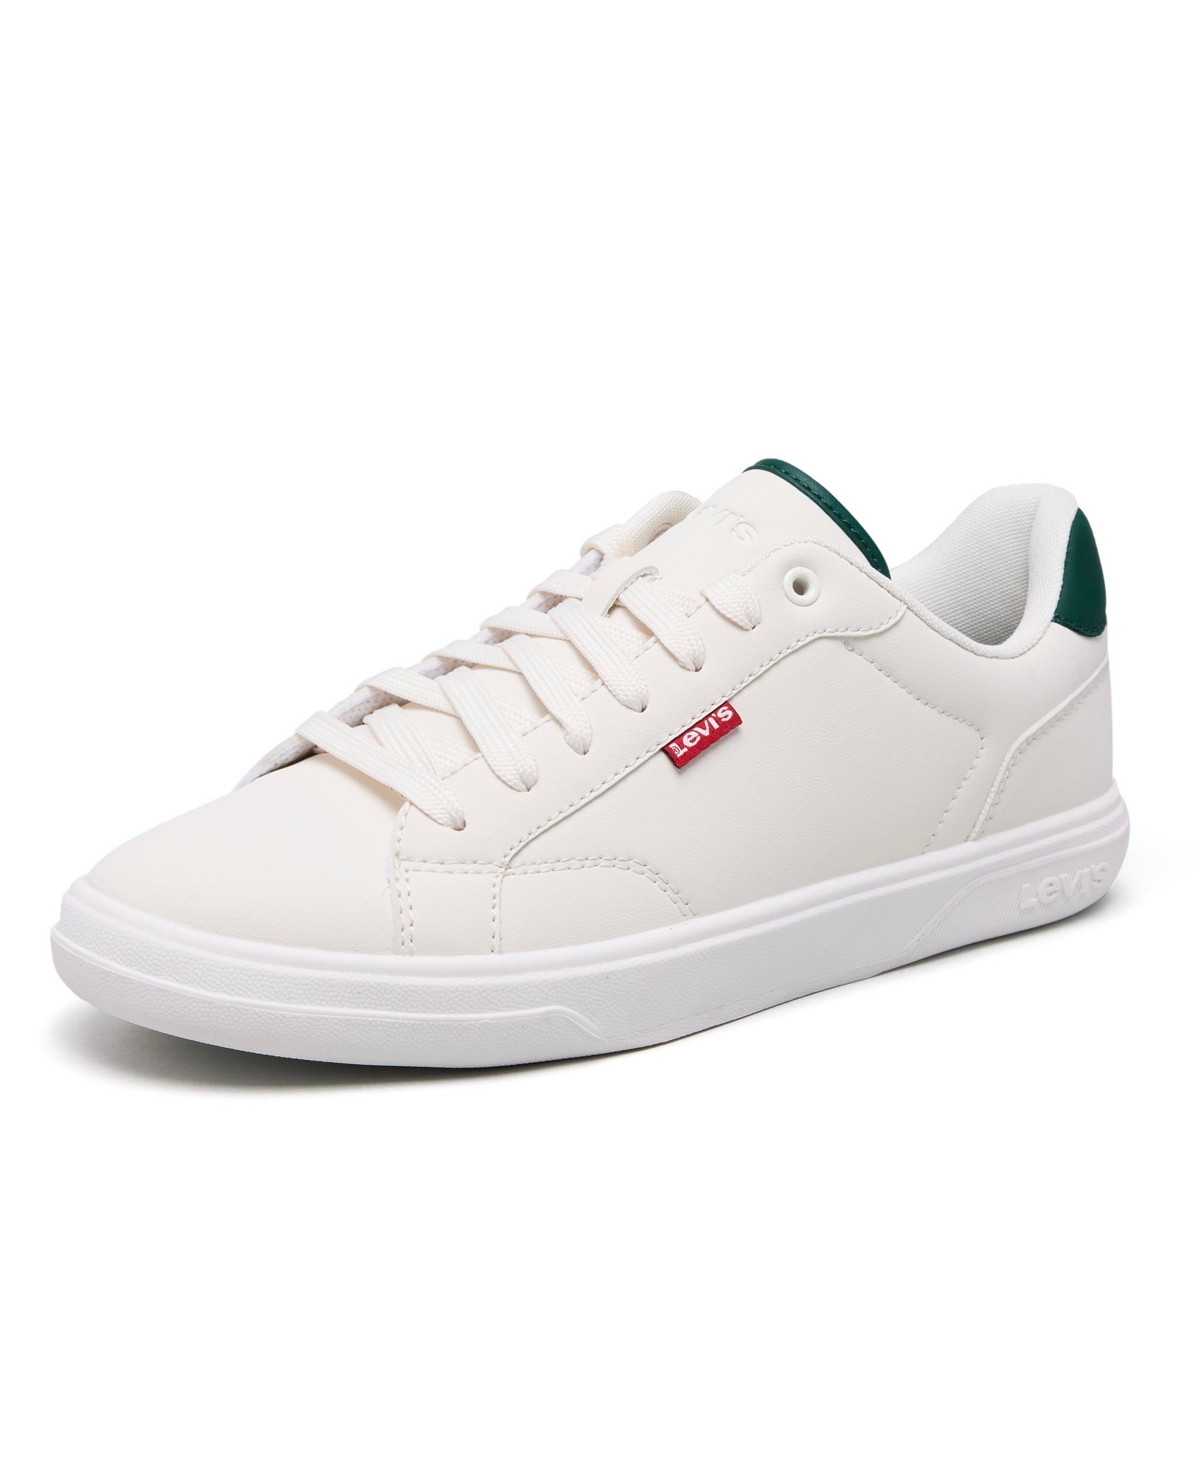 Men's Carter Casual Lace Up Sneakers - White, Green